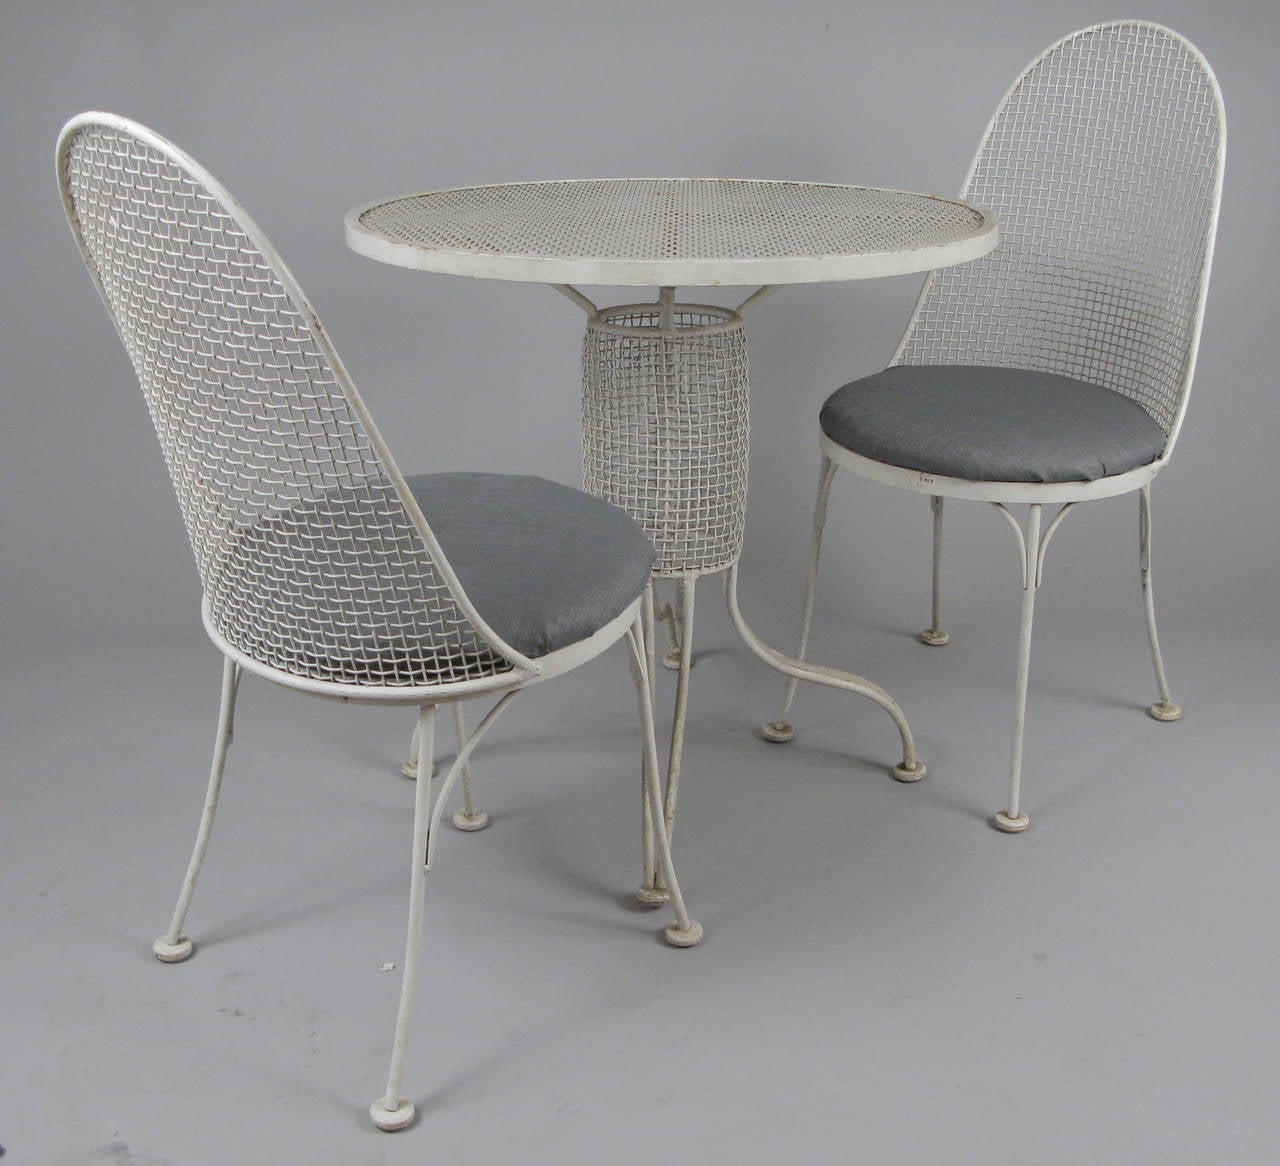 Vintage 1950s Sculpture Cafe Table and Chairs by Russell Woodard 1